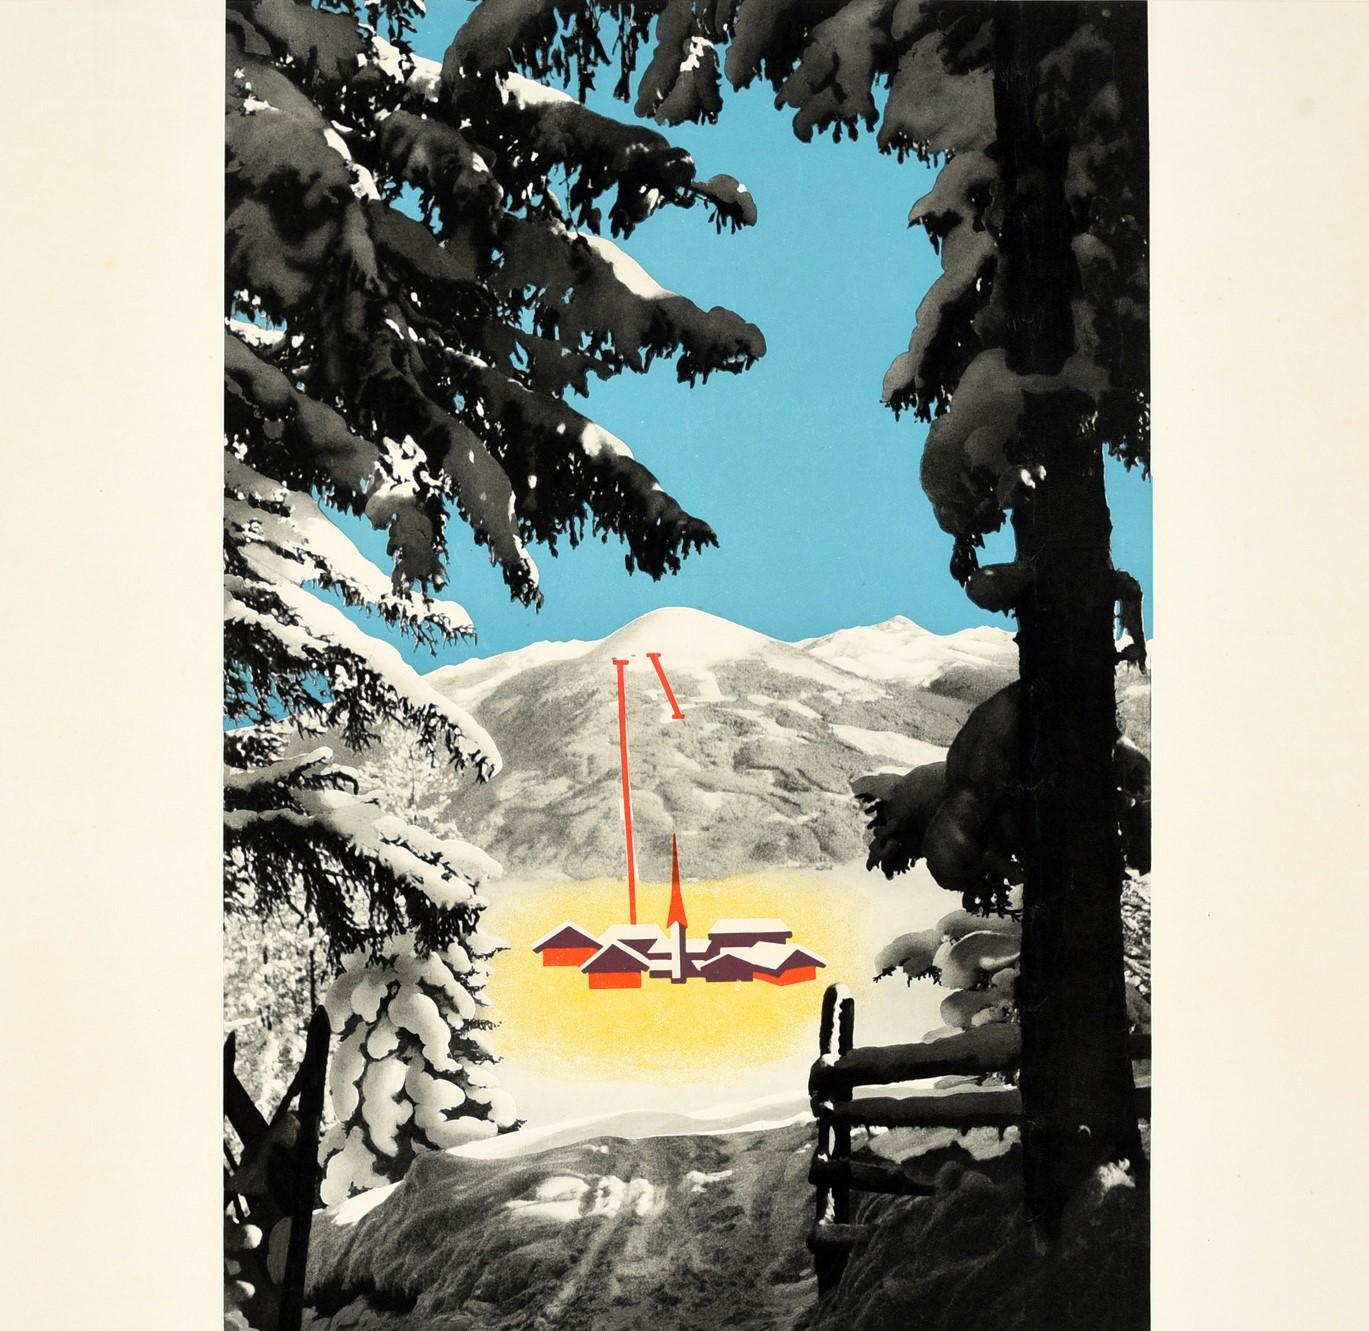 Original vintage poster for Igls Tyrol Austria featuring a black and white design depicting a scenic winter view through snow topped trees to the village glowing yellow with the buildings and church spire in colour and the ski lifts in orange on the